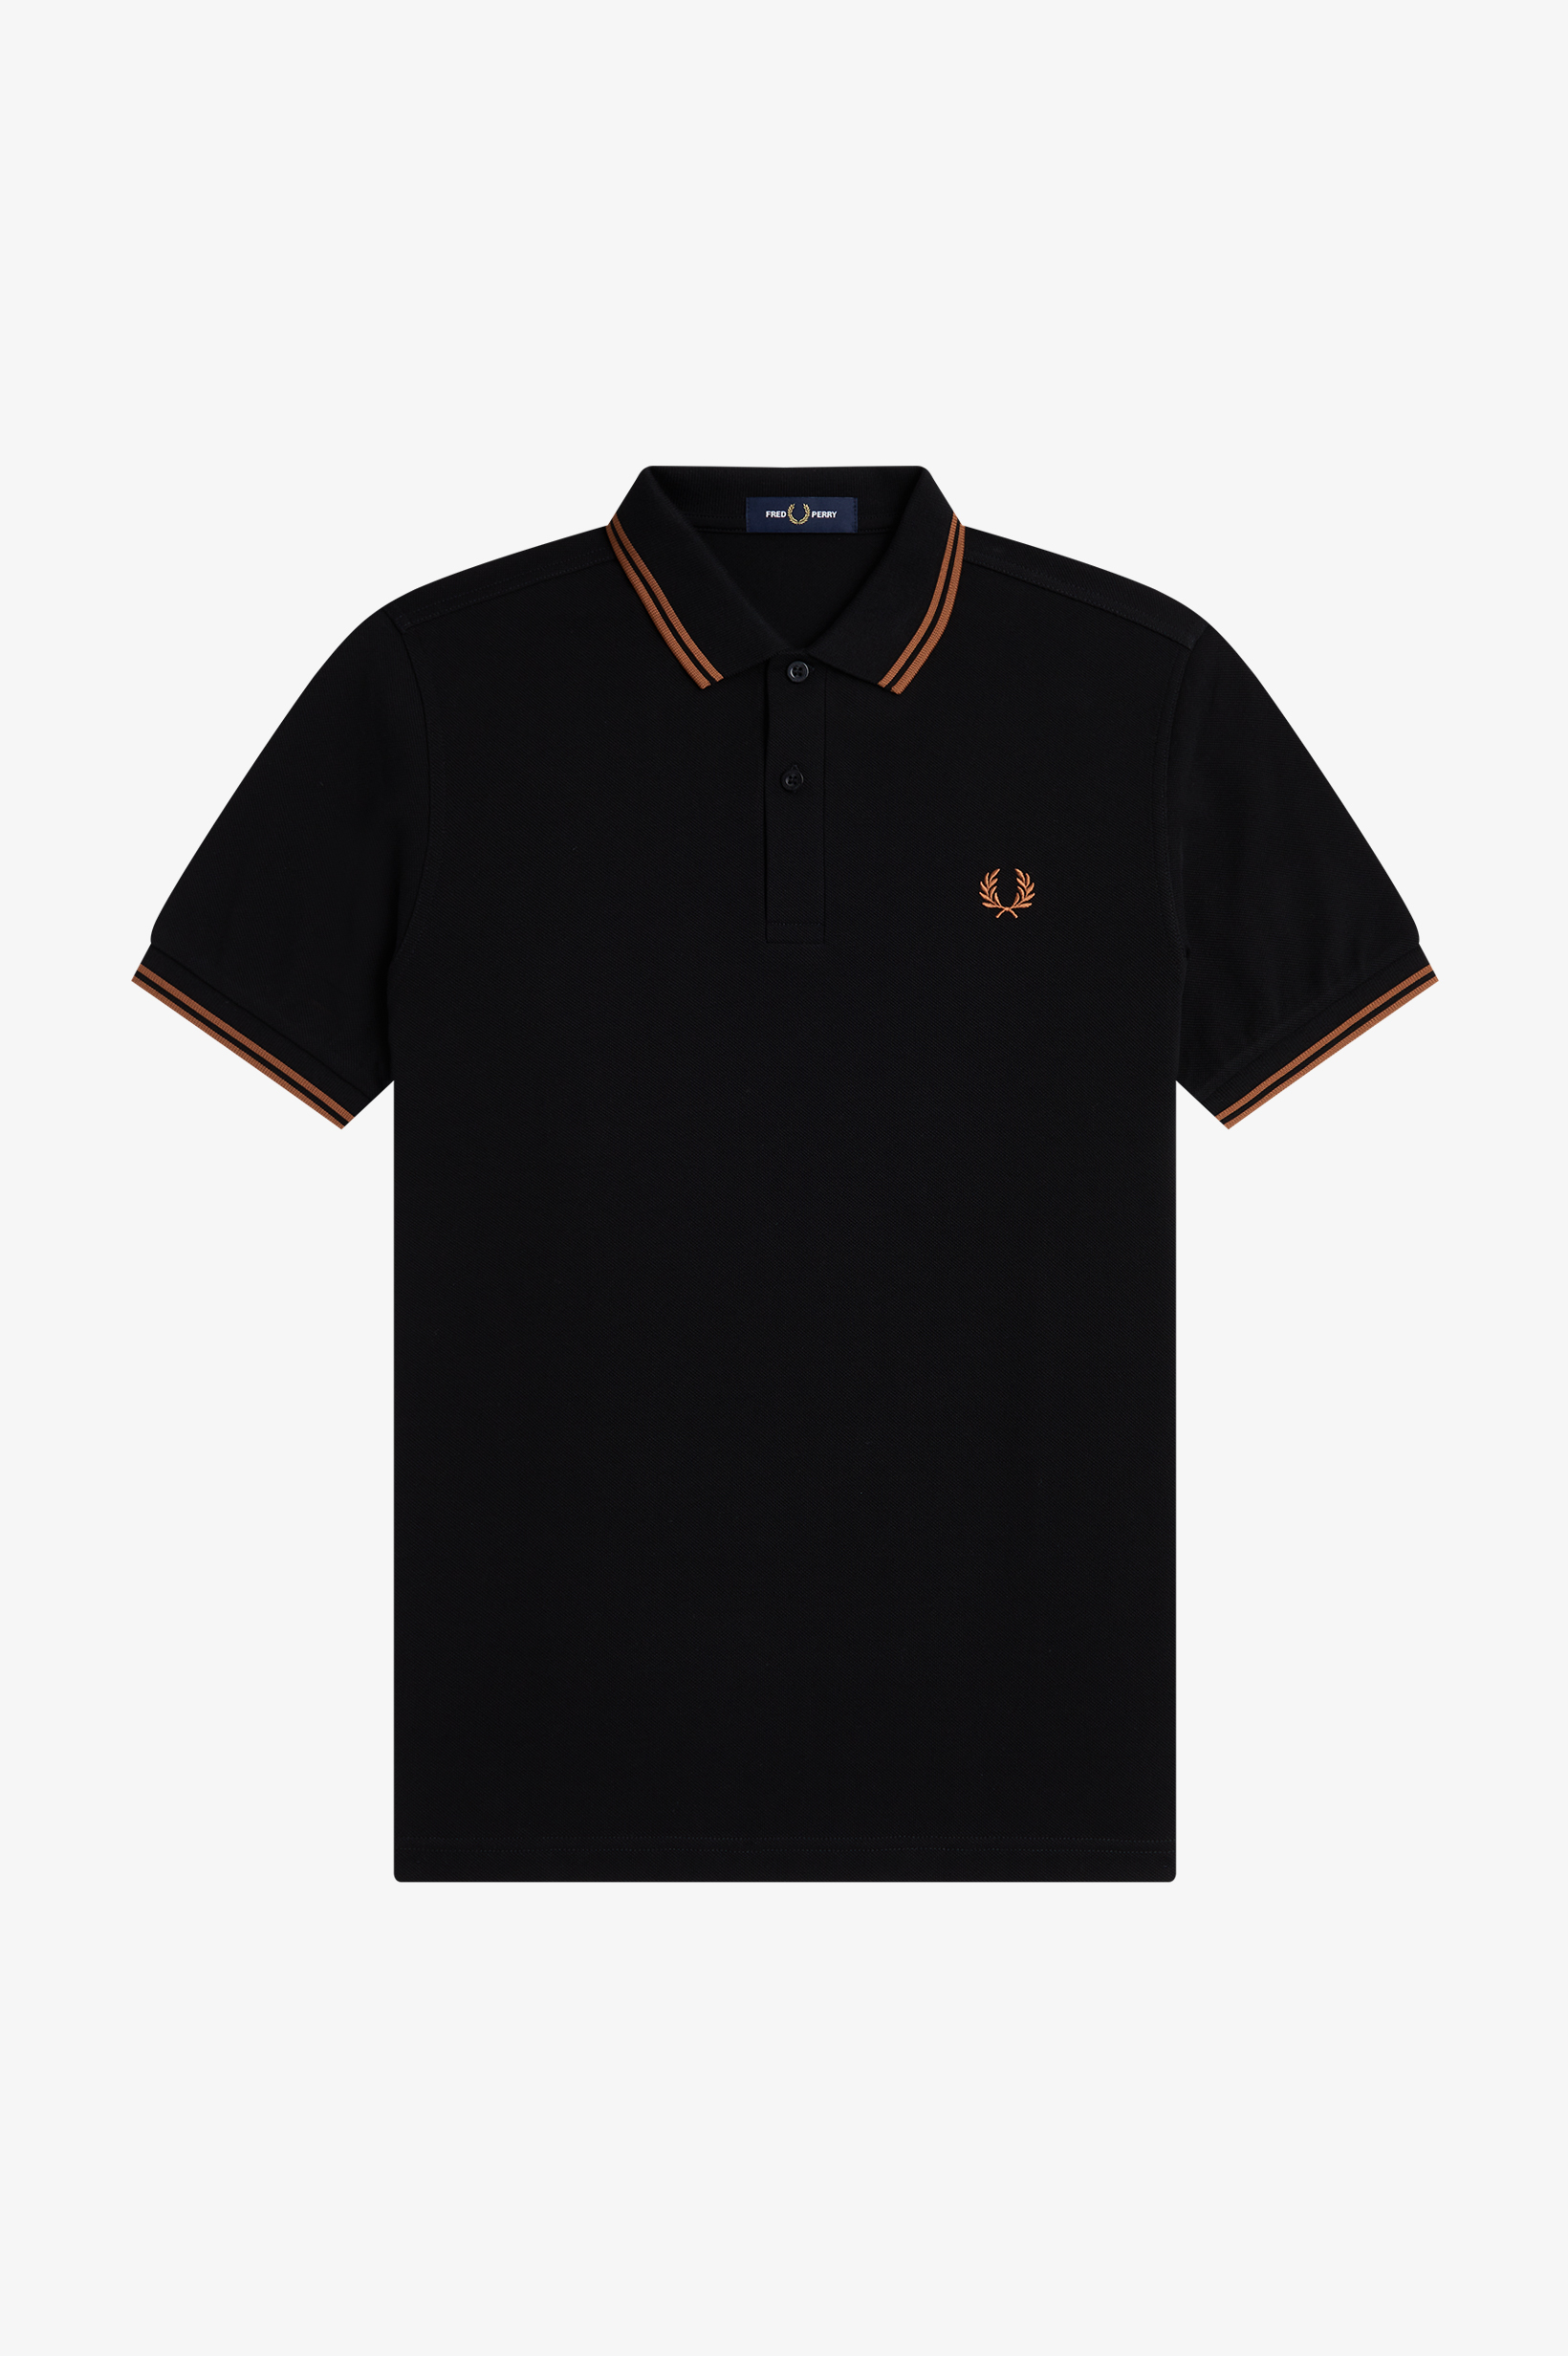 Fred Perry - TWIN TIPPED POLO SHIRT - Black/Nutflake